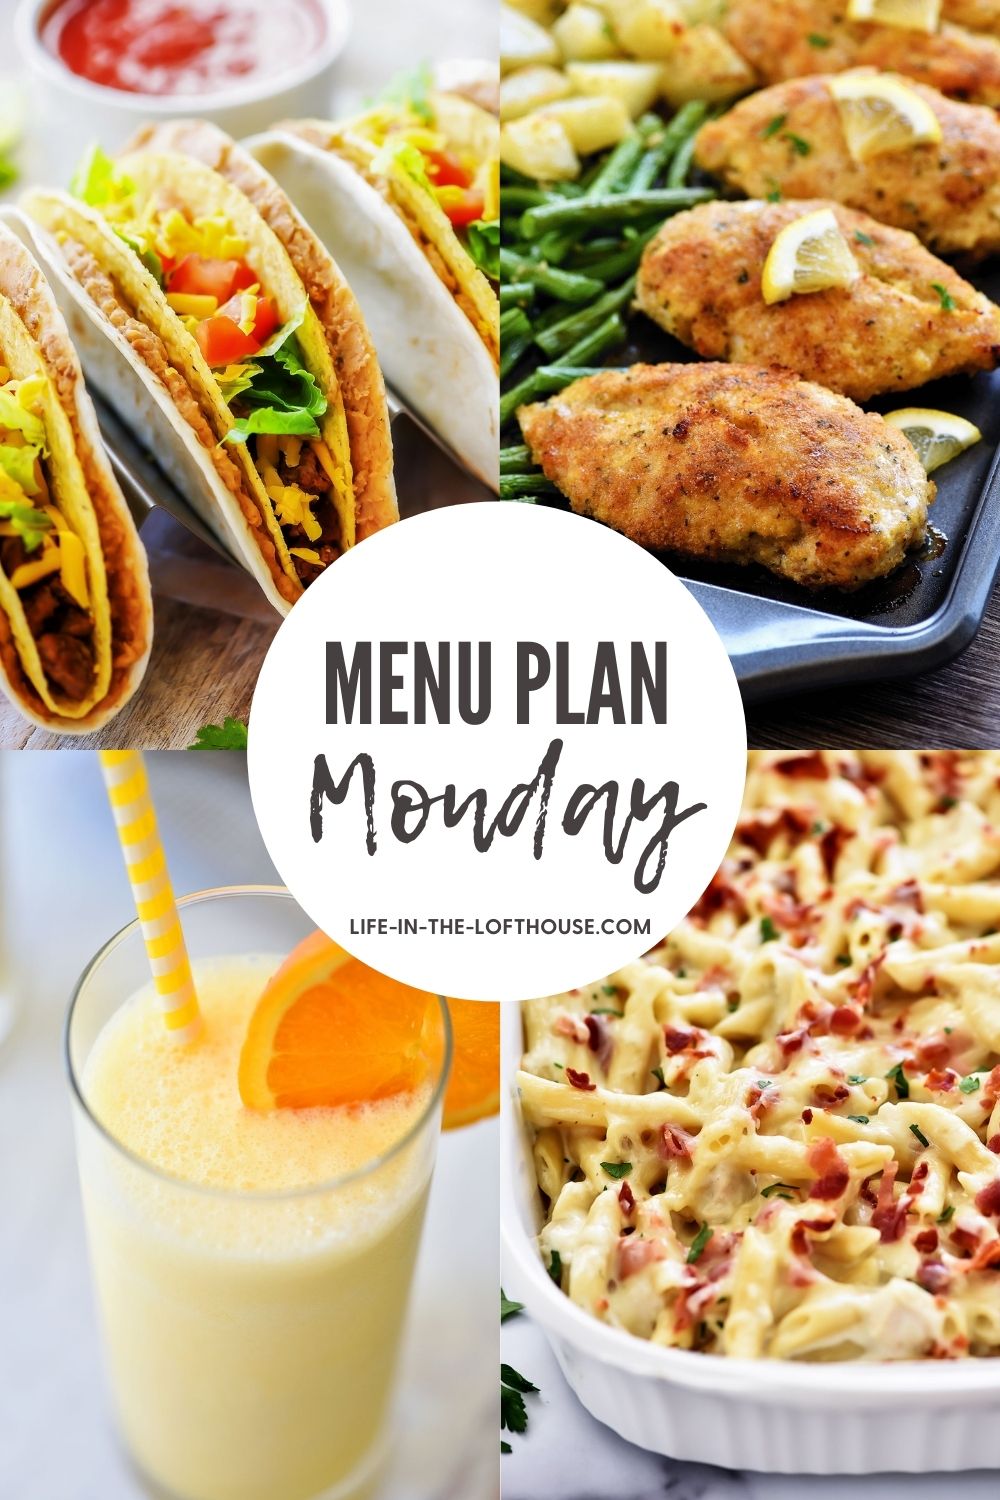 Menu Plan Monday is a list of delicious recipes. Life-in-the-Lofthouse.com